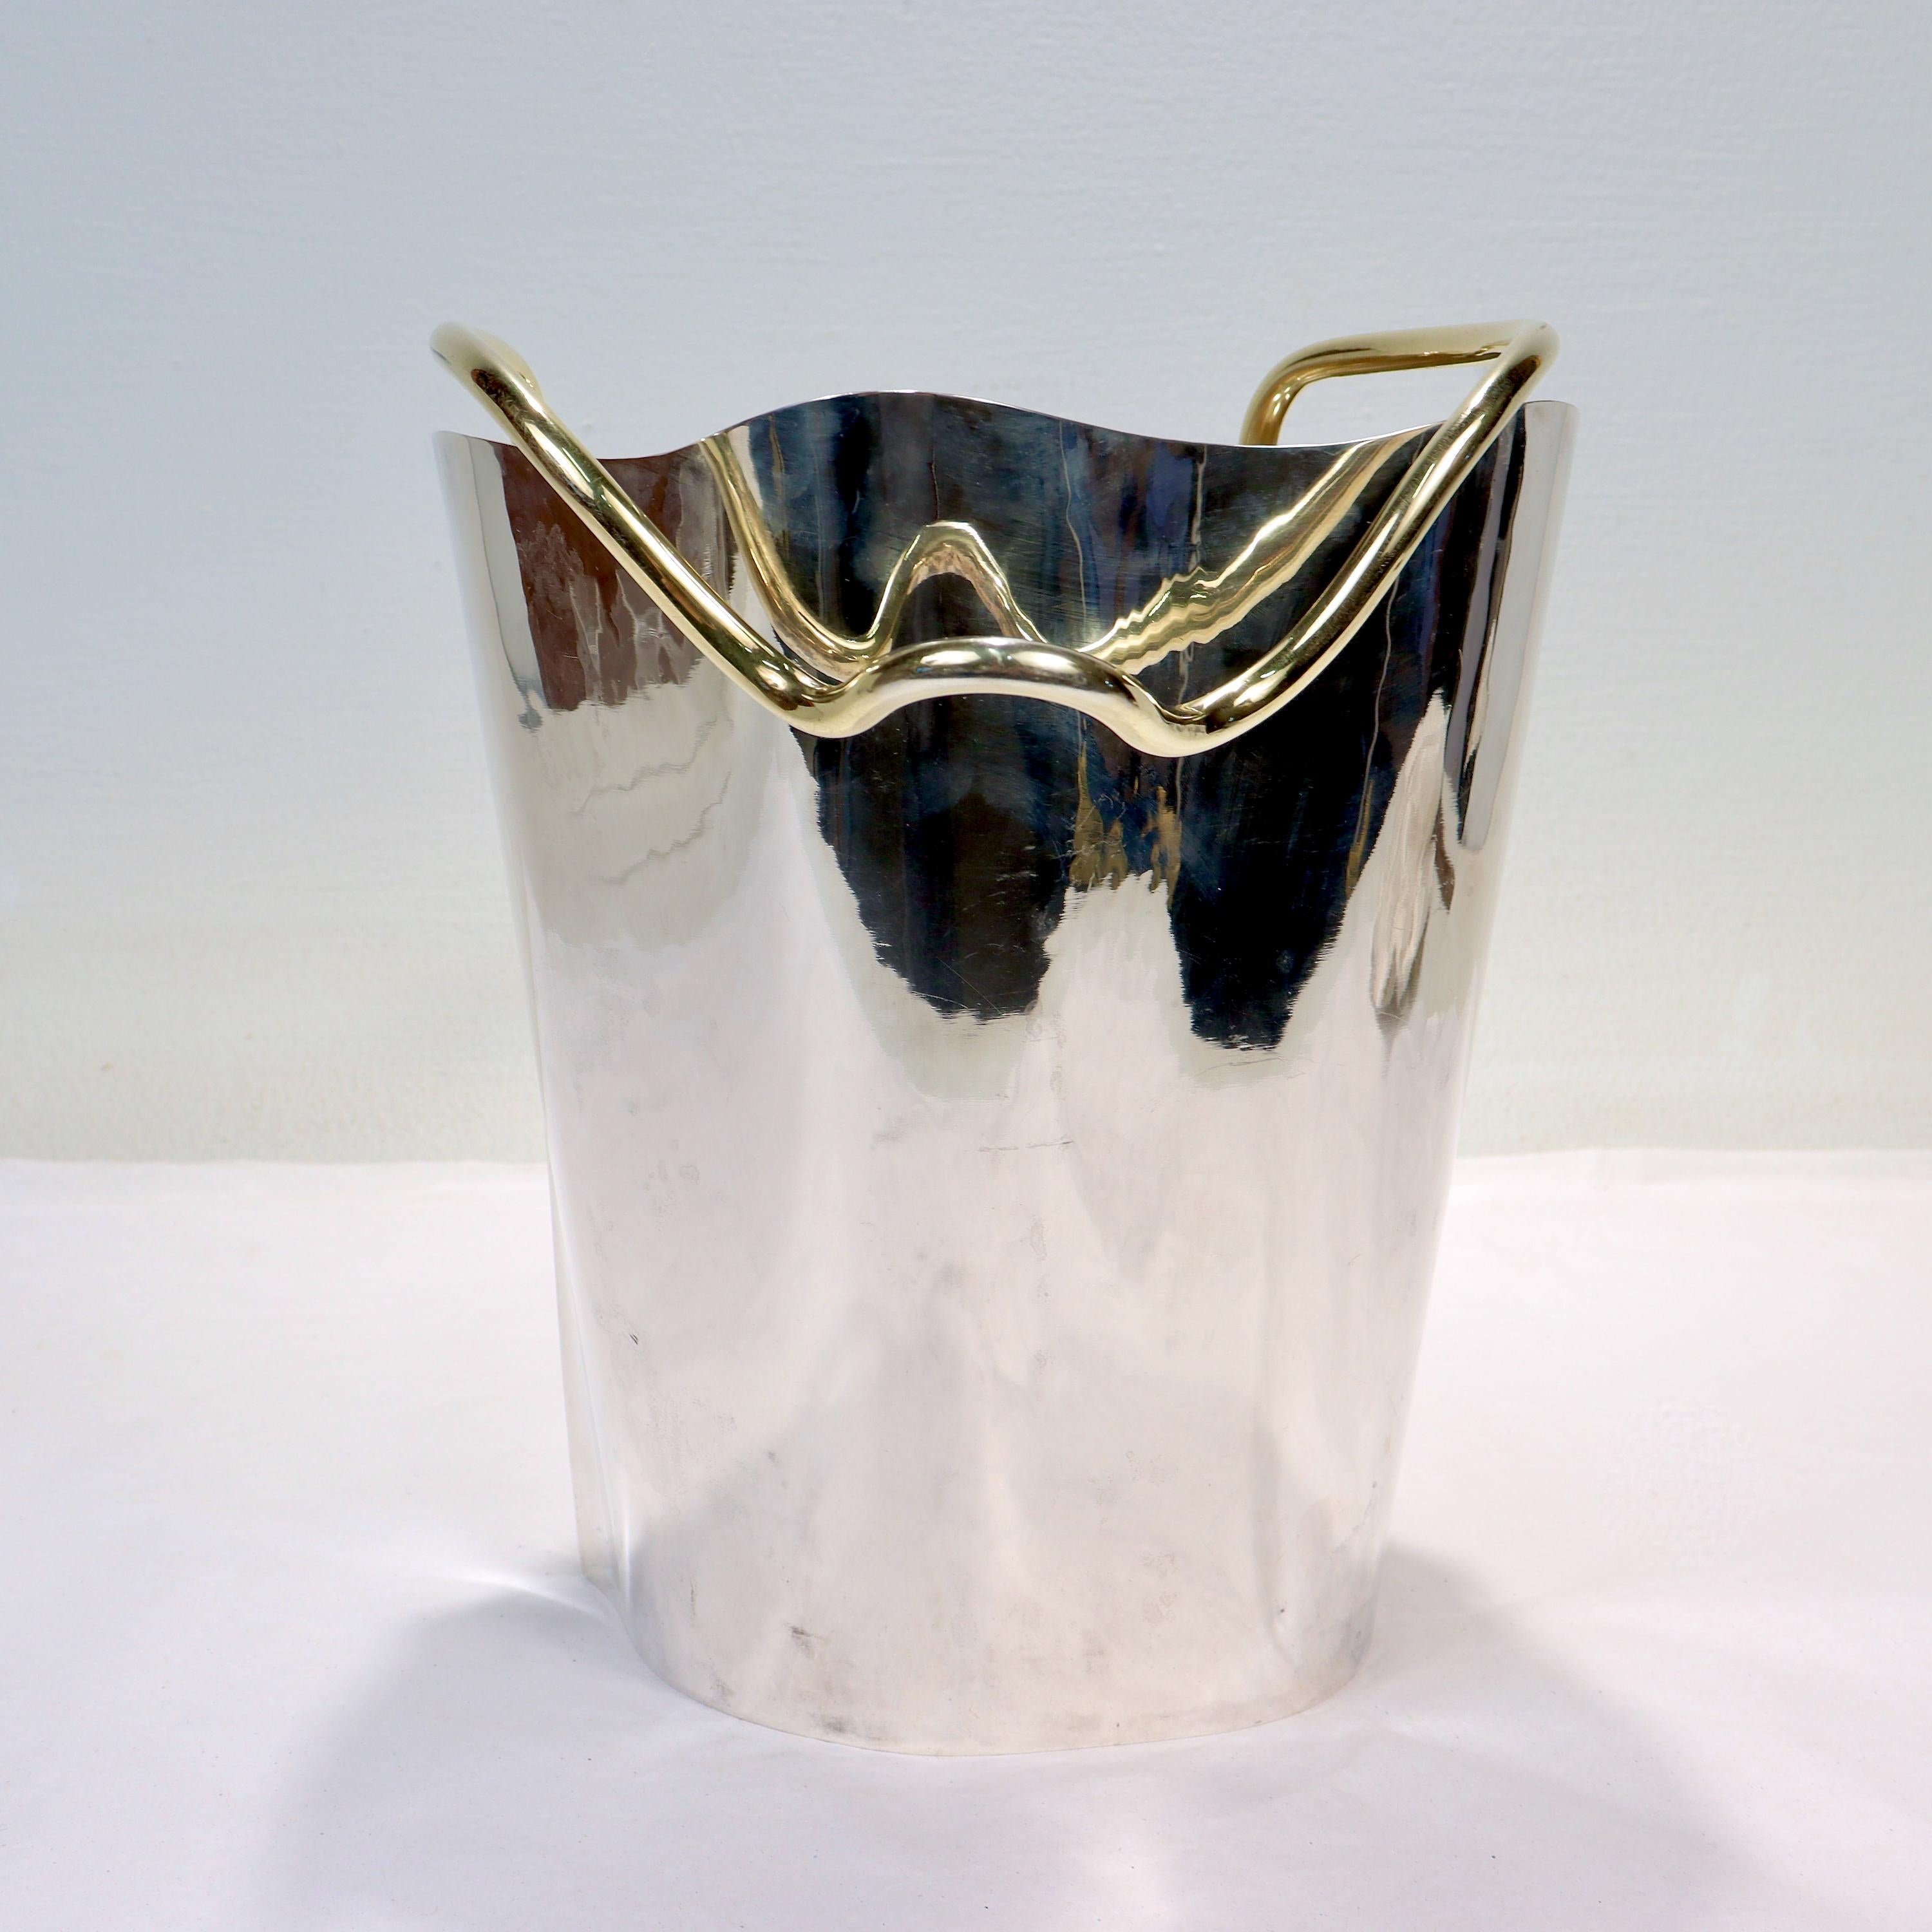 Modernist Sterling Silver Champagne / Ice Bucket by Borek Sipek for Cleto Munari For Sale 1